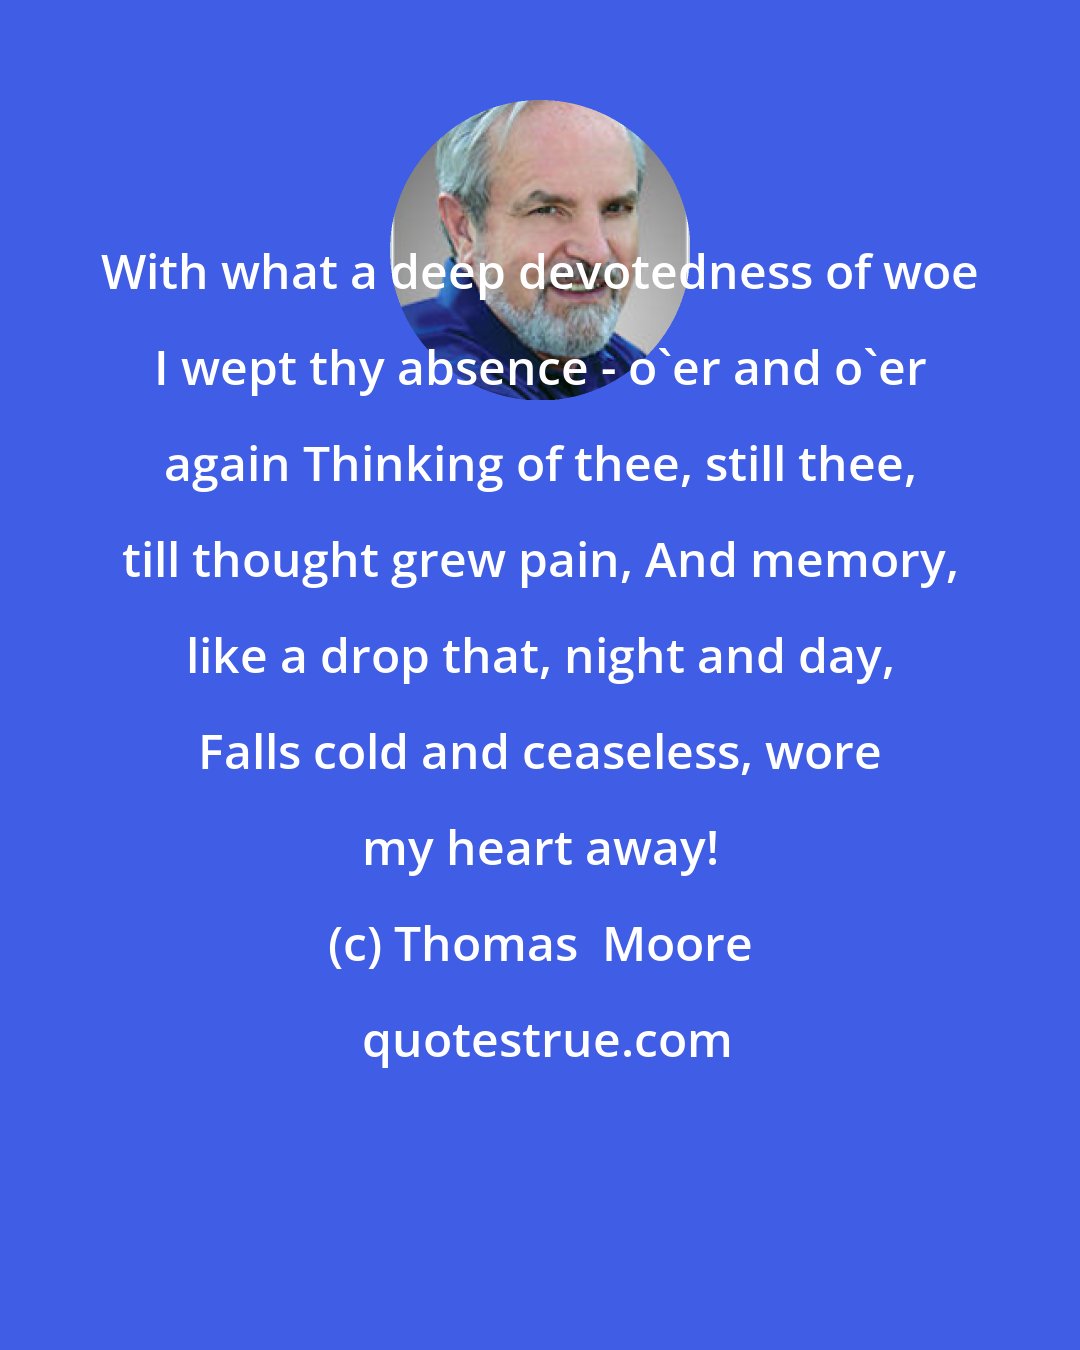 Thomas  Moore: With what a deep devotedness of woe I wept thy absence - o'er and o'er again Thinking of thee, still thee, till thought grew pain, And memory, like a drop that, night and day, Falls cold and ceaseless, wore my heart away!